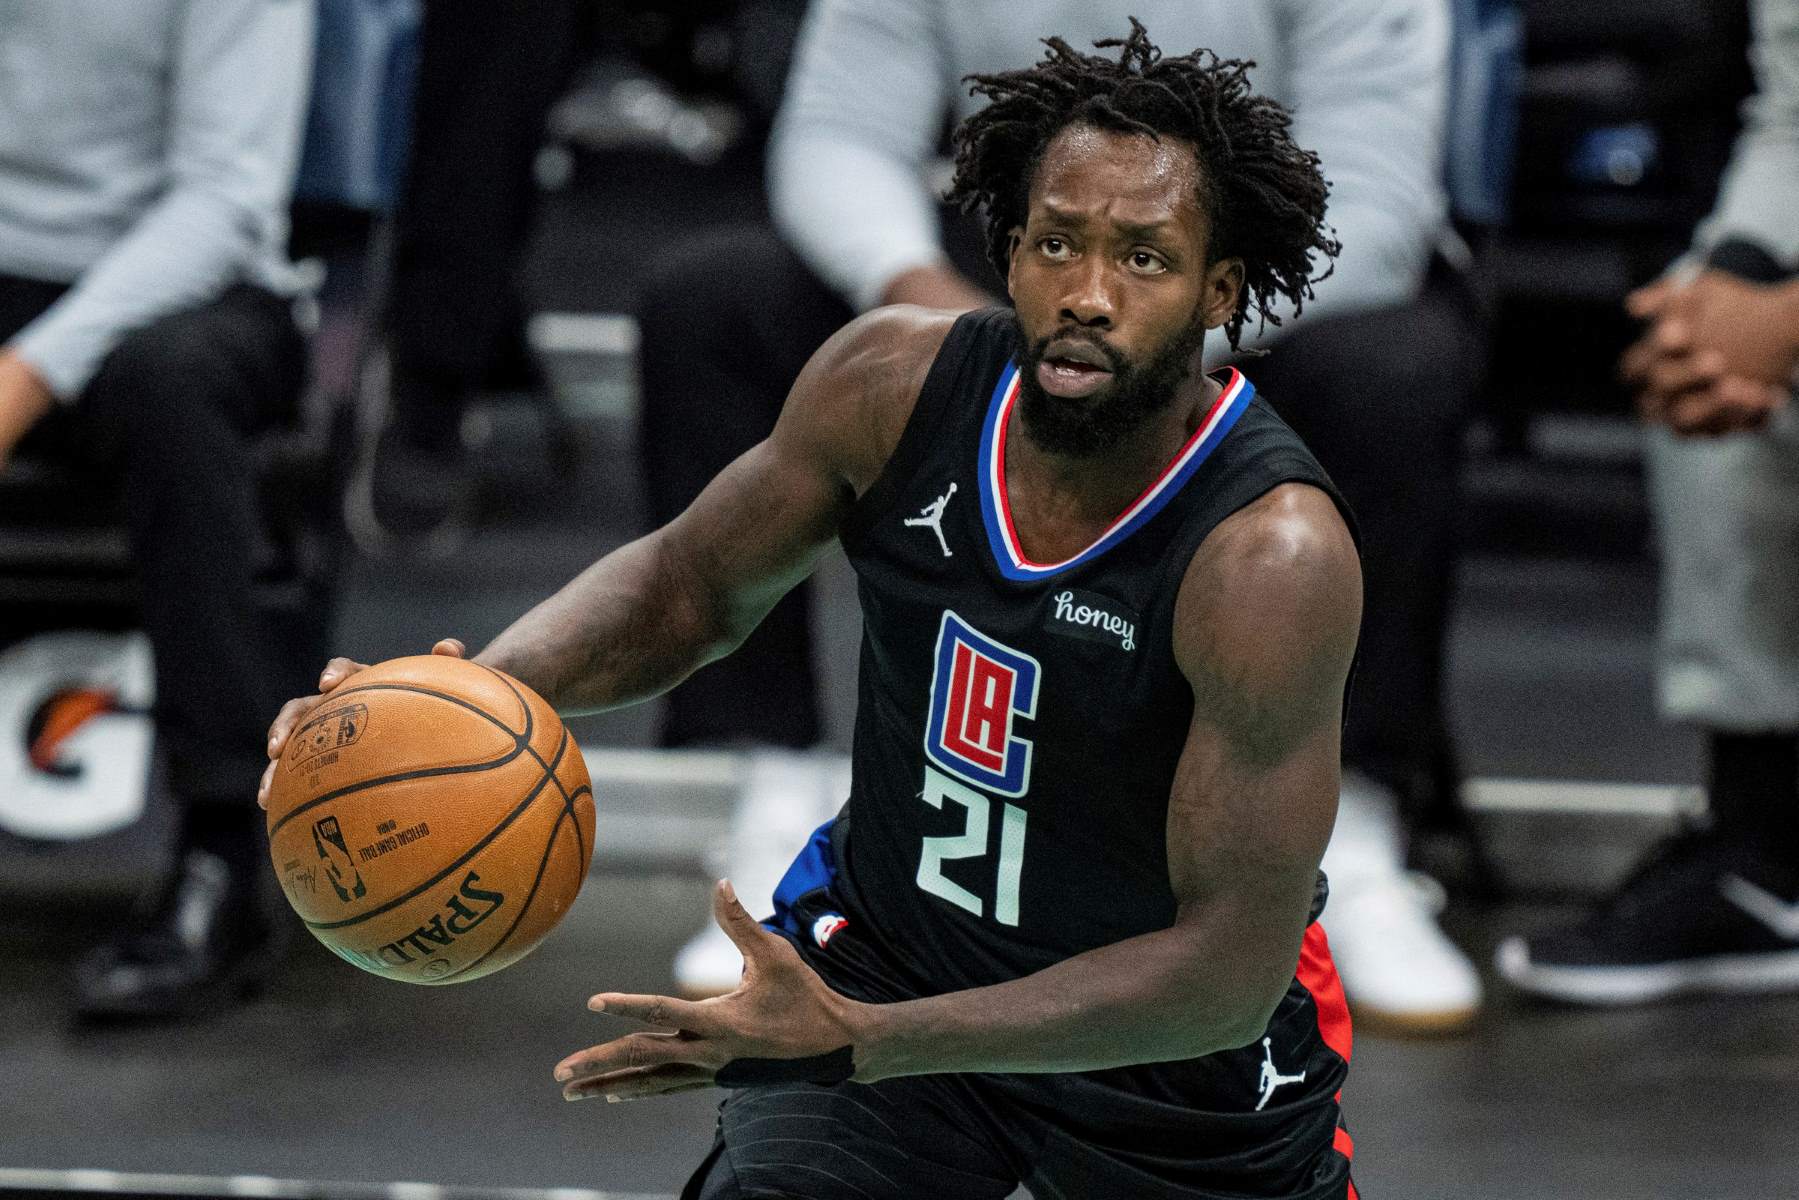 13 Extraordinary Facts About Patrick Beverley - Facts.net